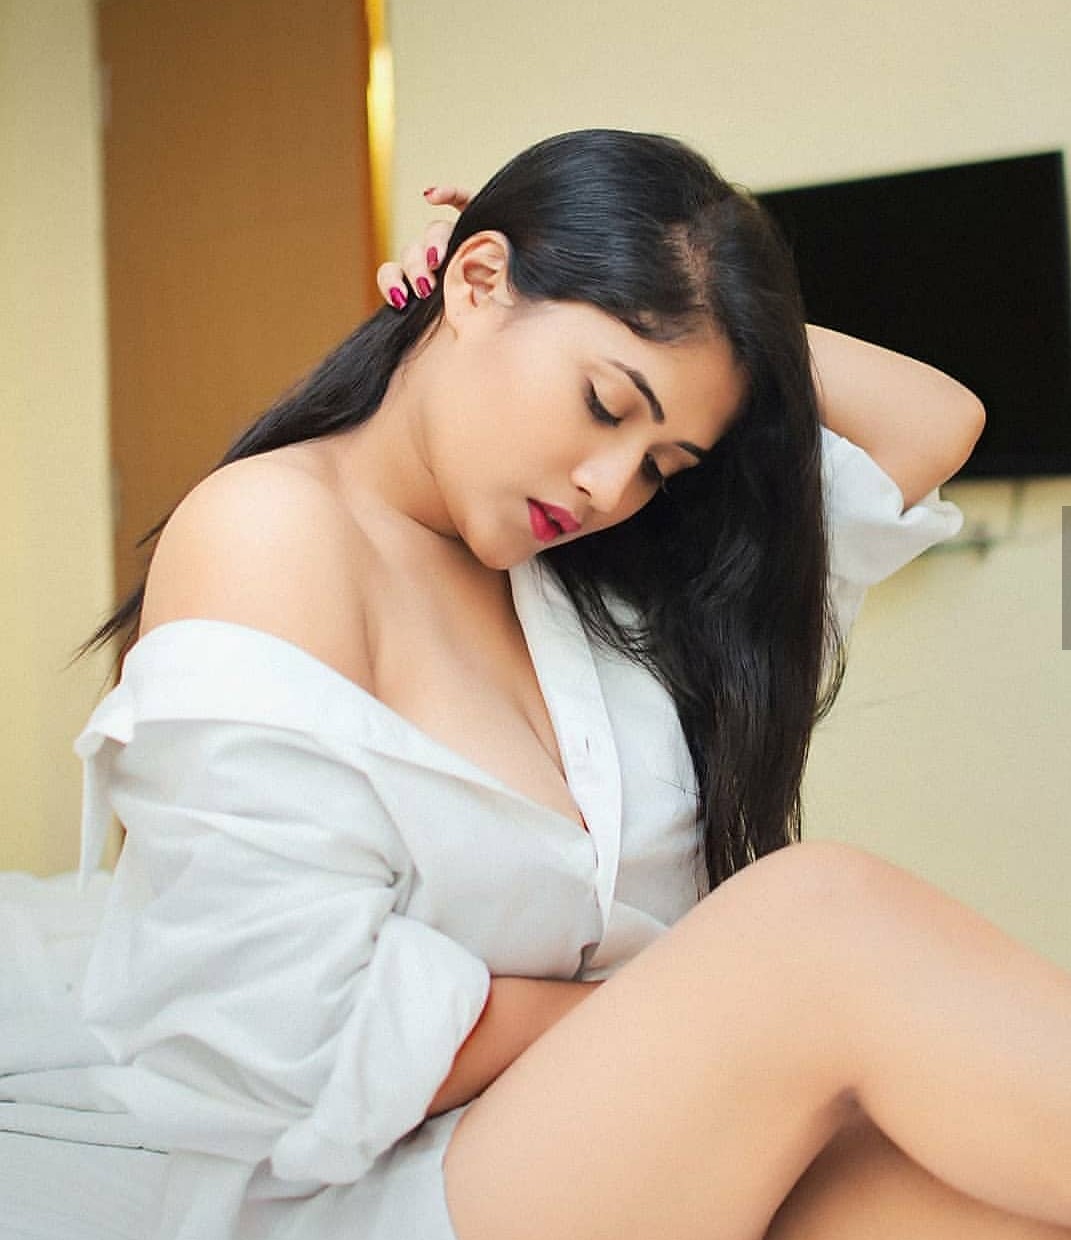 Call girls in delhi 9711168618 Welcome To Vip Escort Services In Delhi,South West Delhi,Services,Free Classifieds,Post Free Ads,77traders.com